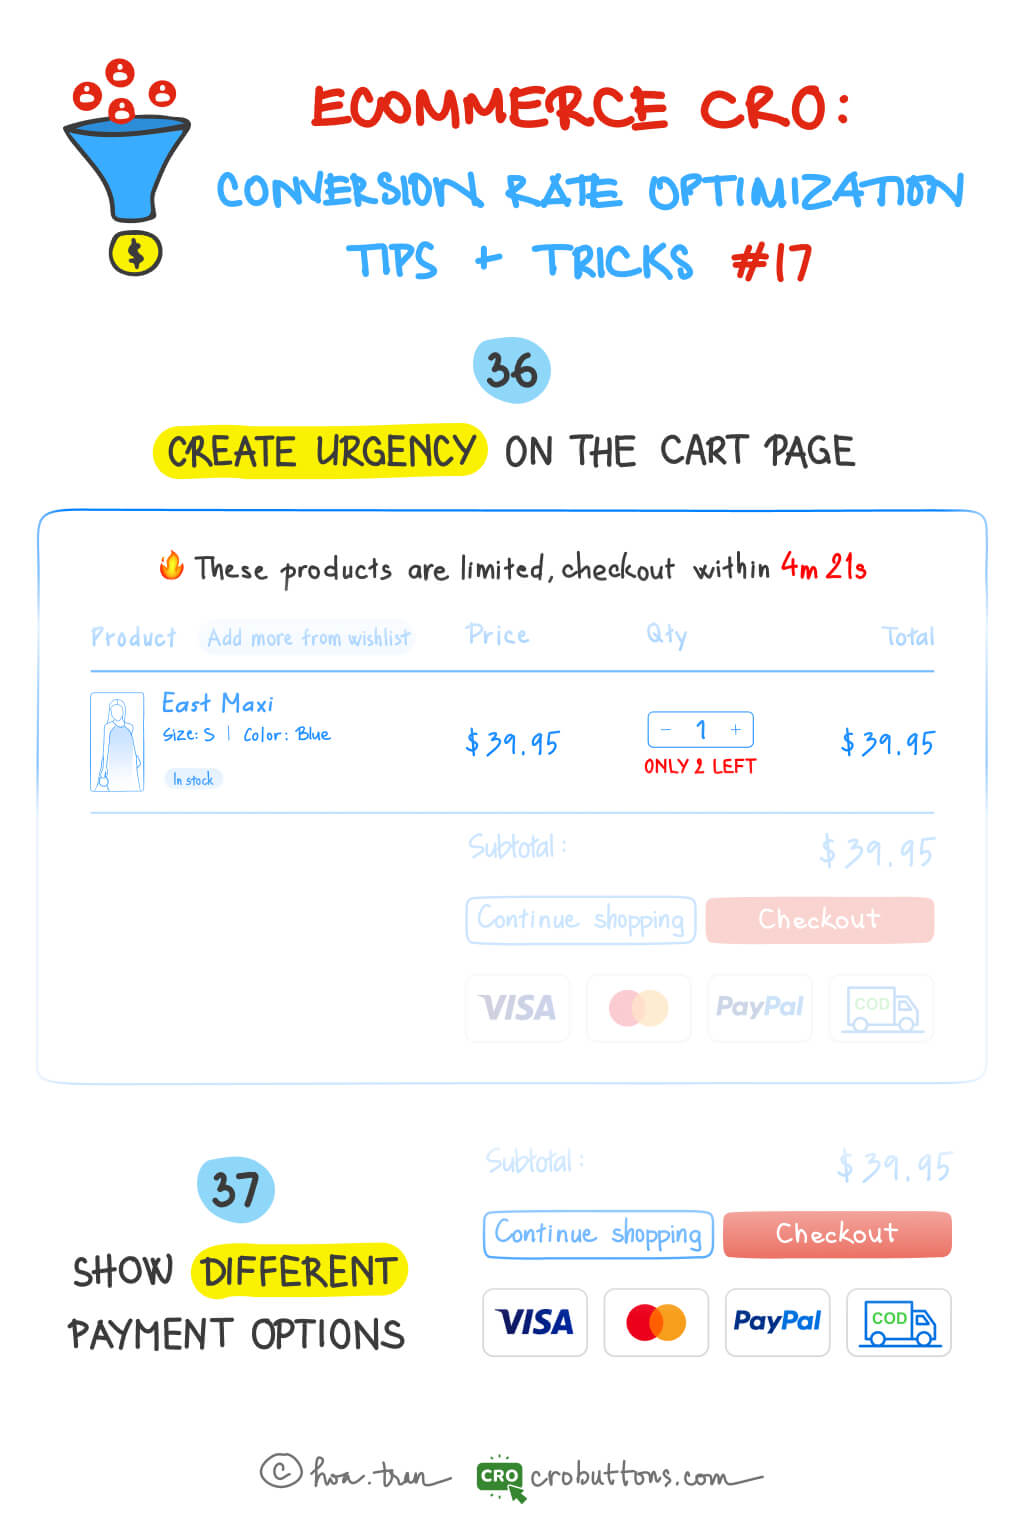 How to Increase The Checkout Conversion Rate – eCommerce CRO Tips & Tricks #17